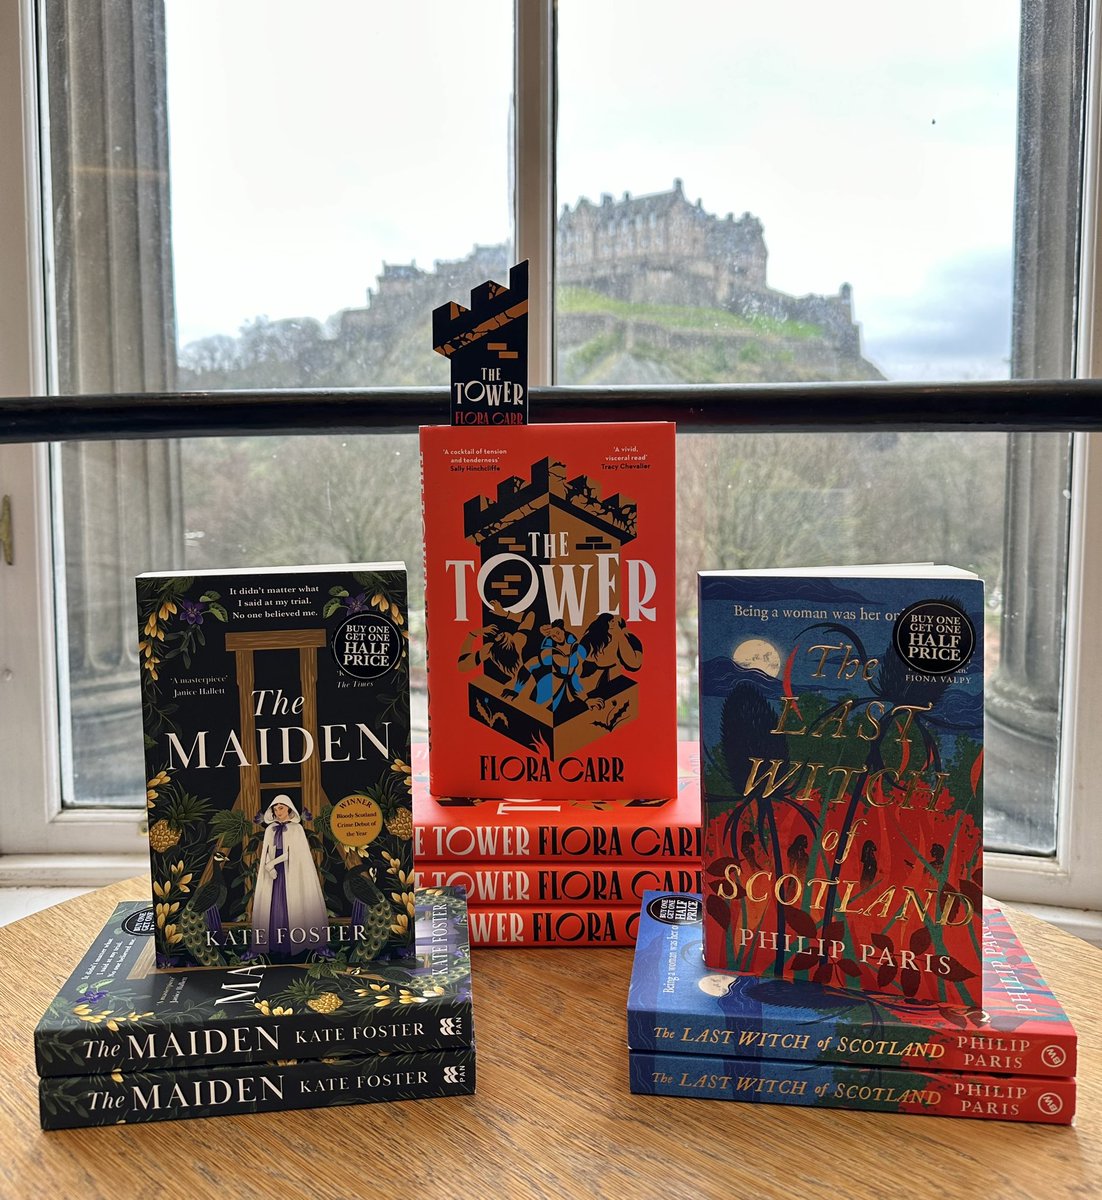 Are you looking for a historical novel set in Scotland? We have you covered! All three of these novels are gripping, unique and come highly recommended from the West End team! 📚 #waterstones #waterstoneswestend #historicalfiction #scottishbooks